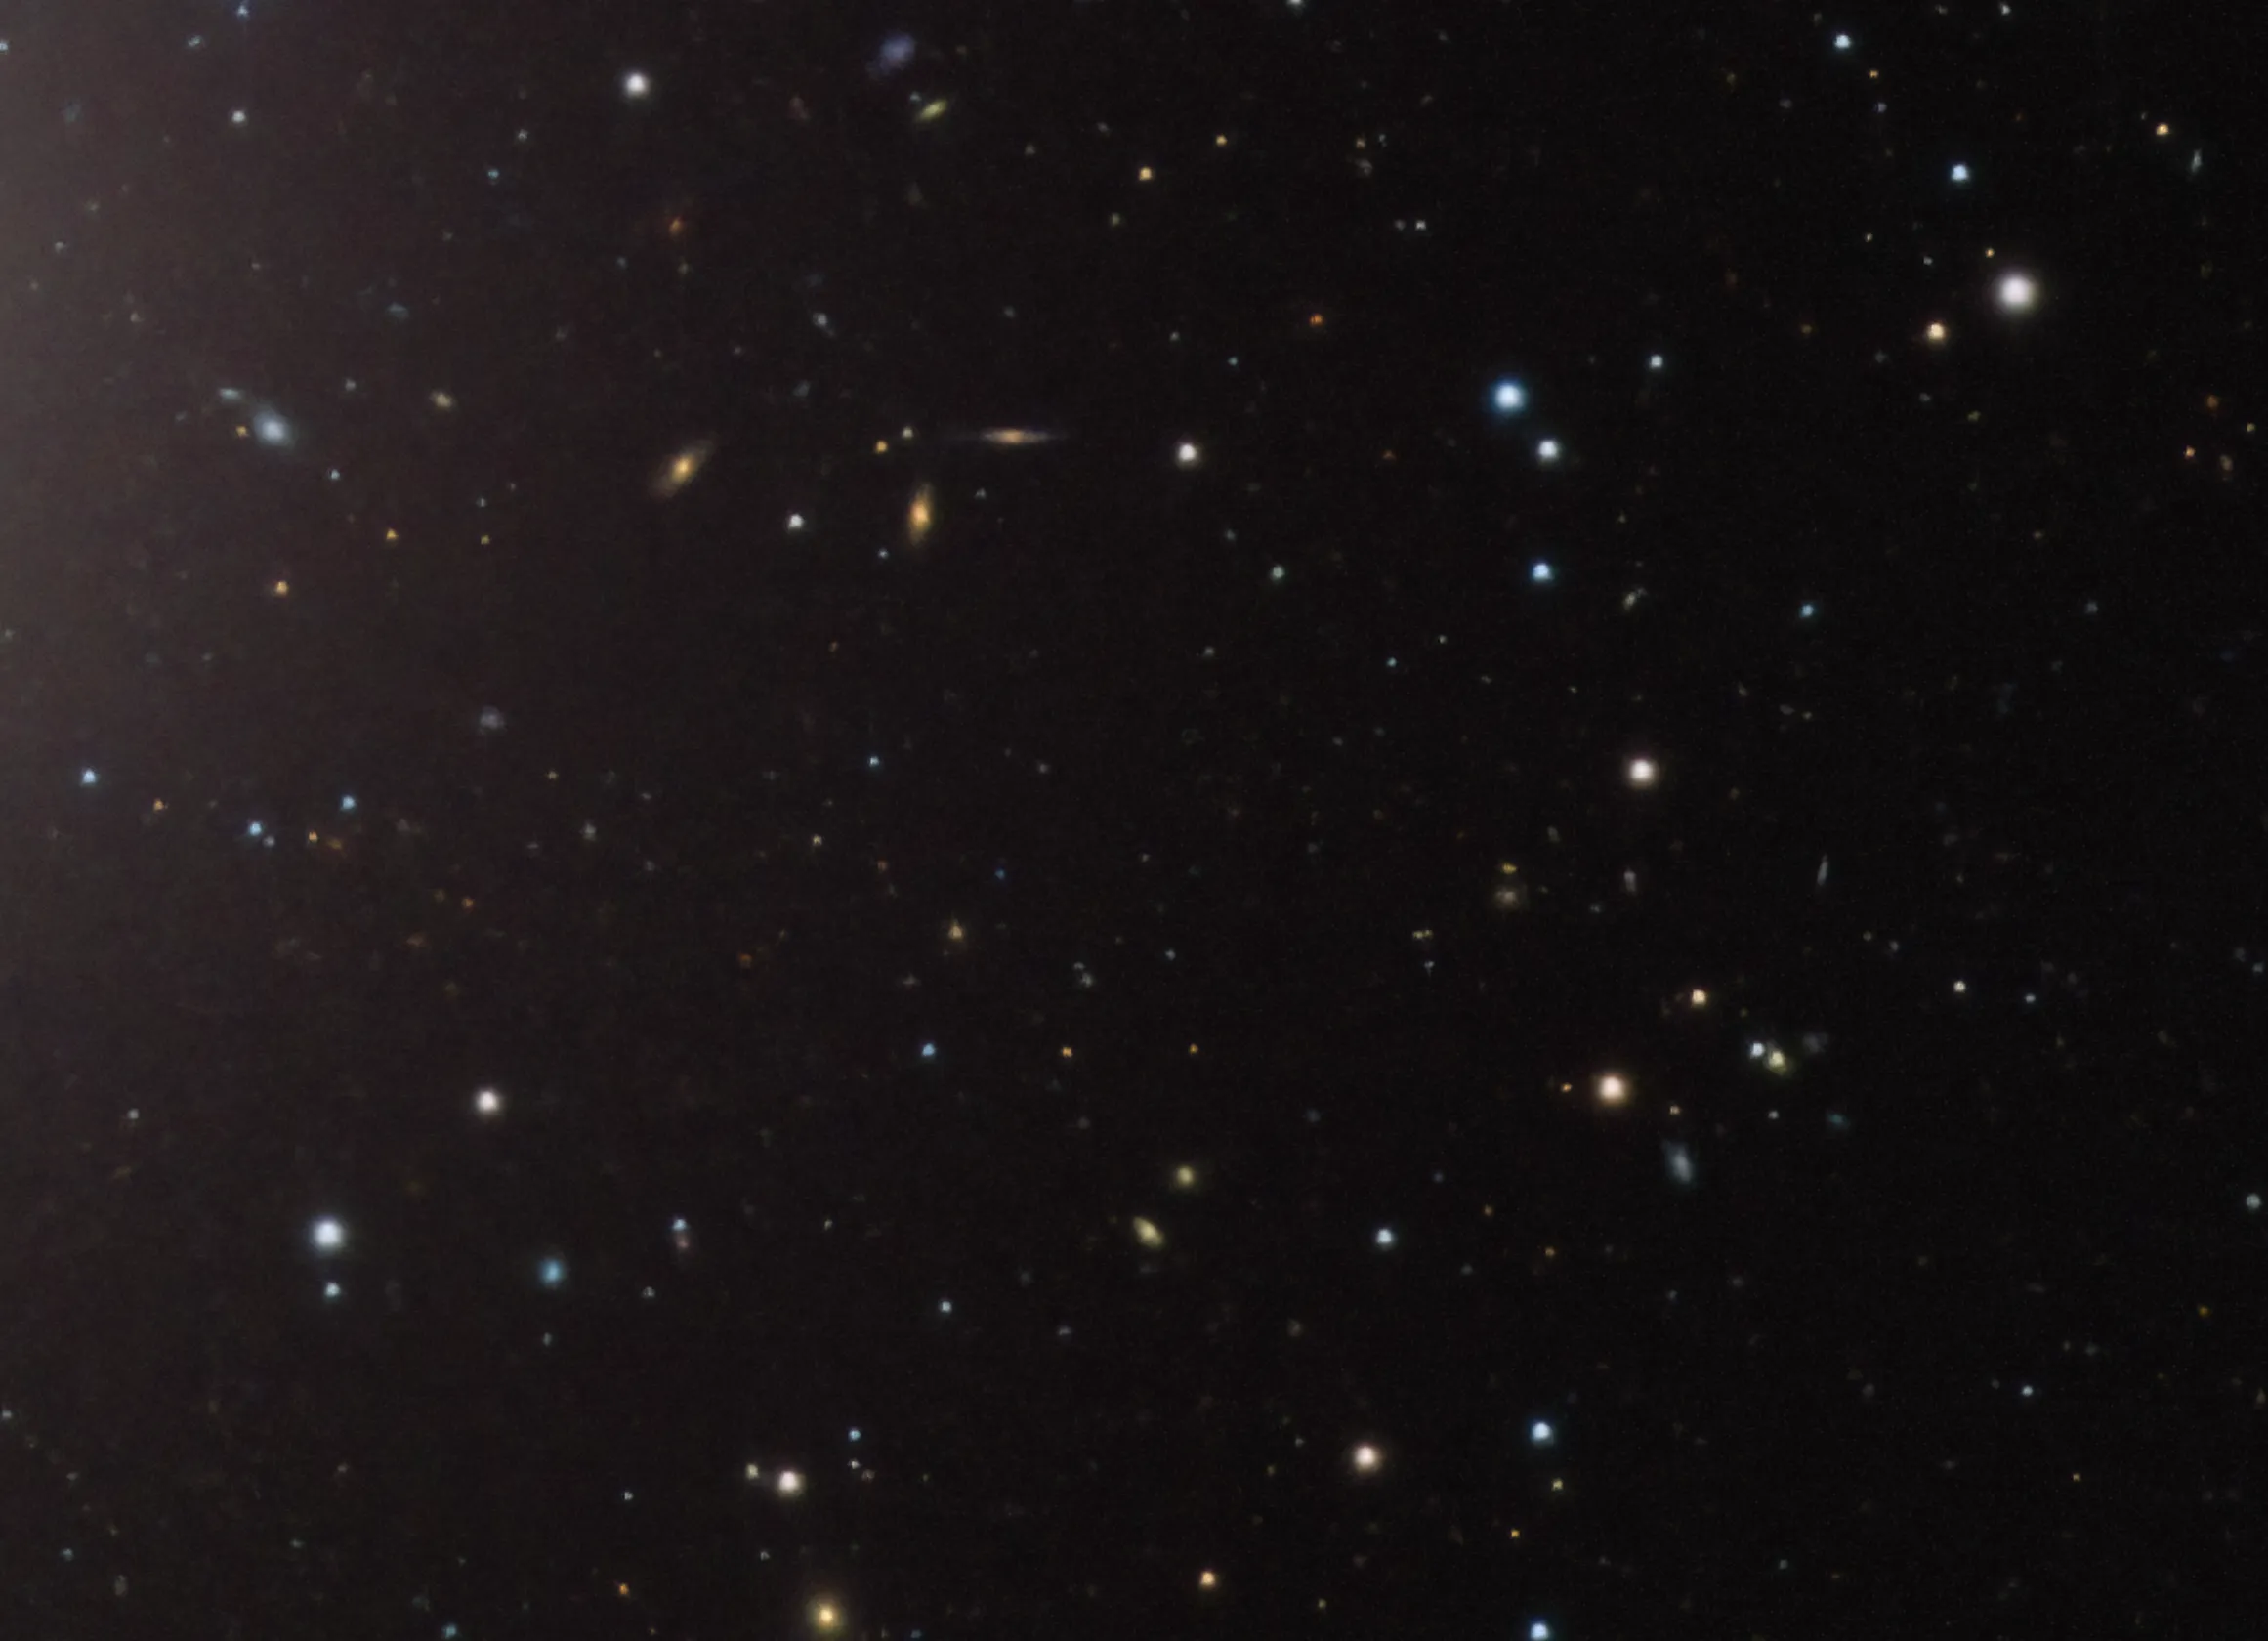 Many other galaxies in the same frame as M104 Sombrero